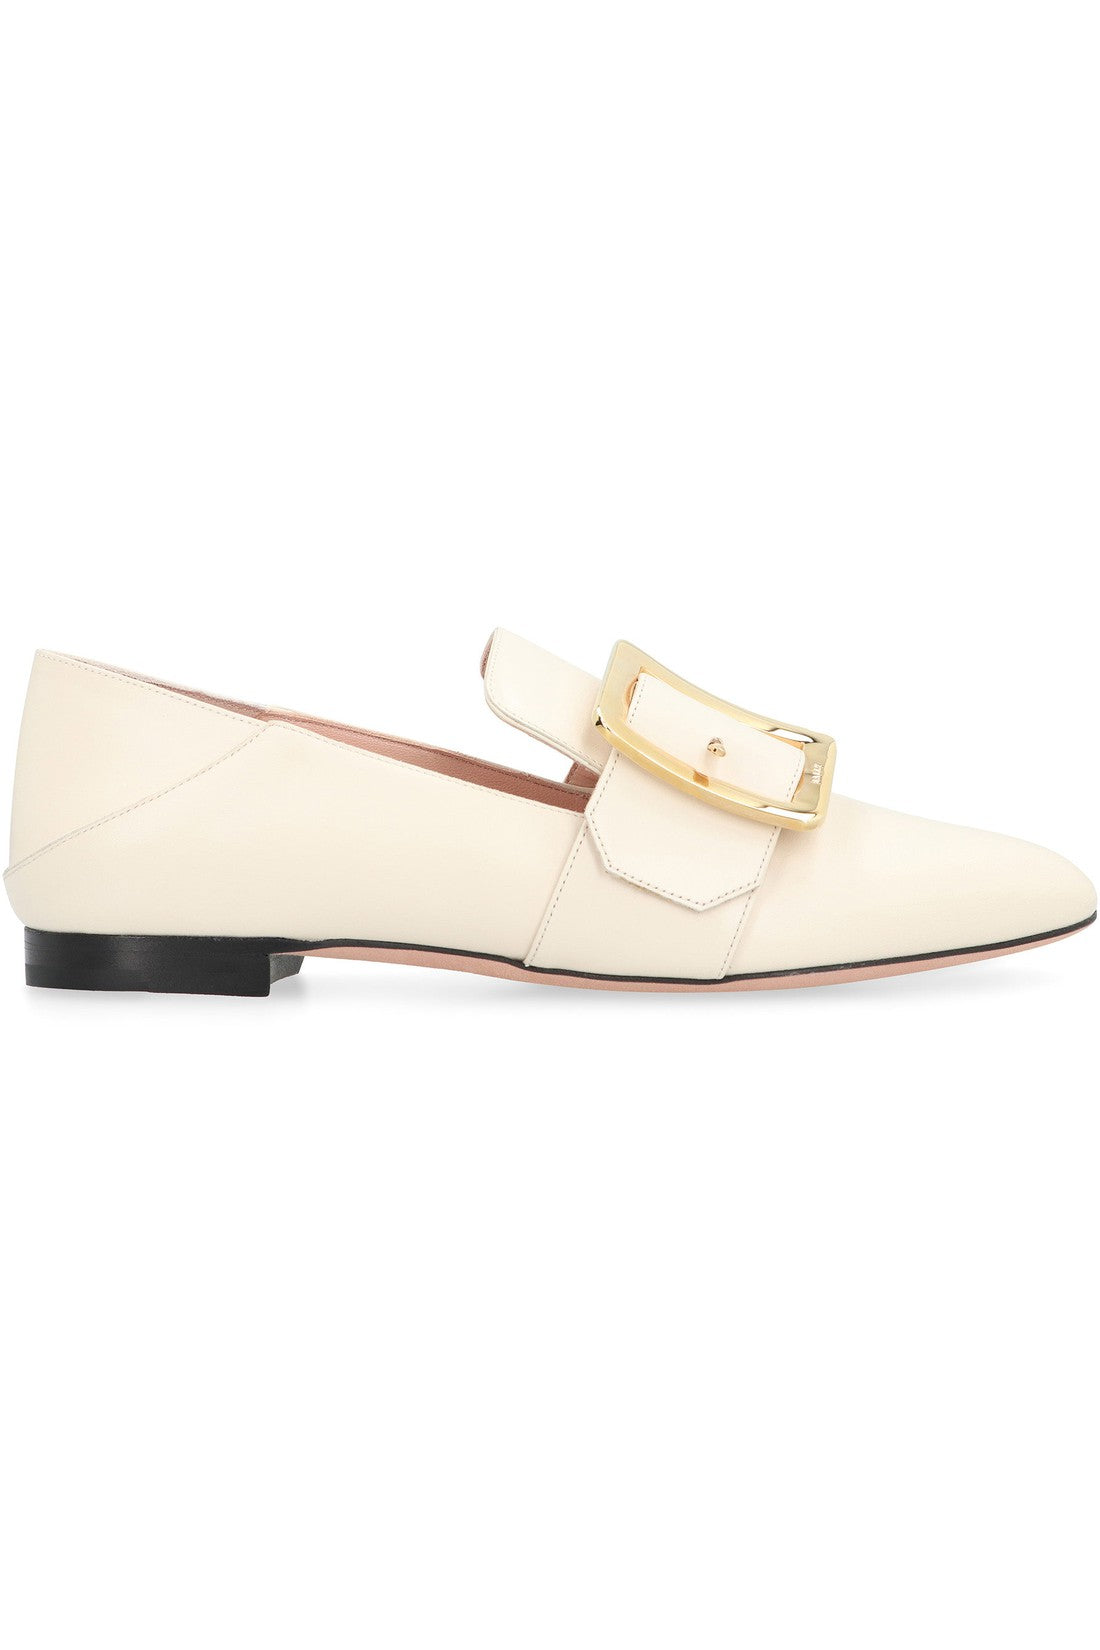 Bally-OUTLET-SALE-Janelle leather loafers-ARCHIVIST